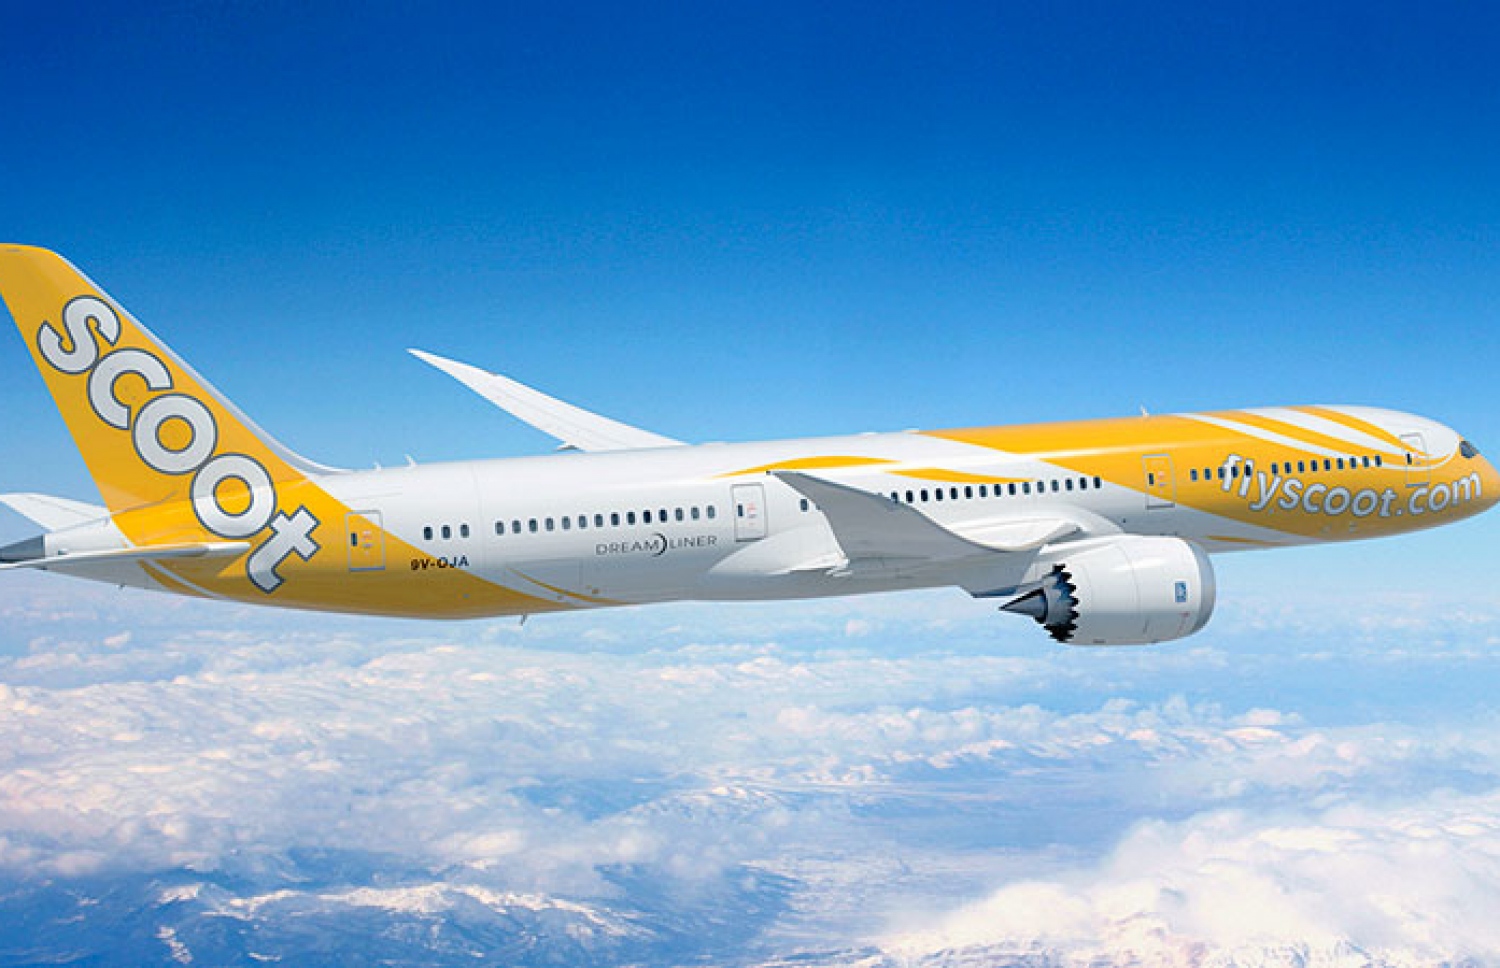 Scoot launches VTL flights to/from Kuala Lumpur, additional flights to other Malaysian destinations in the pipeline